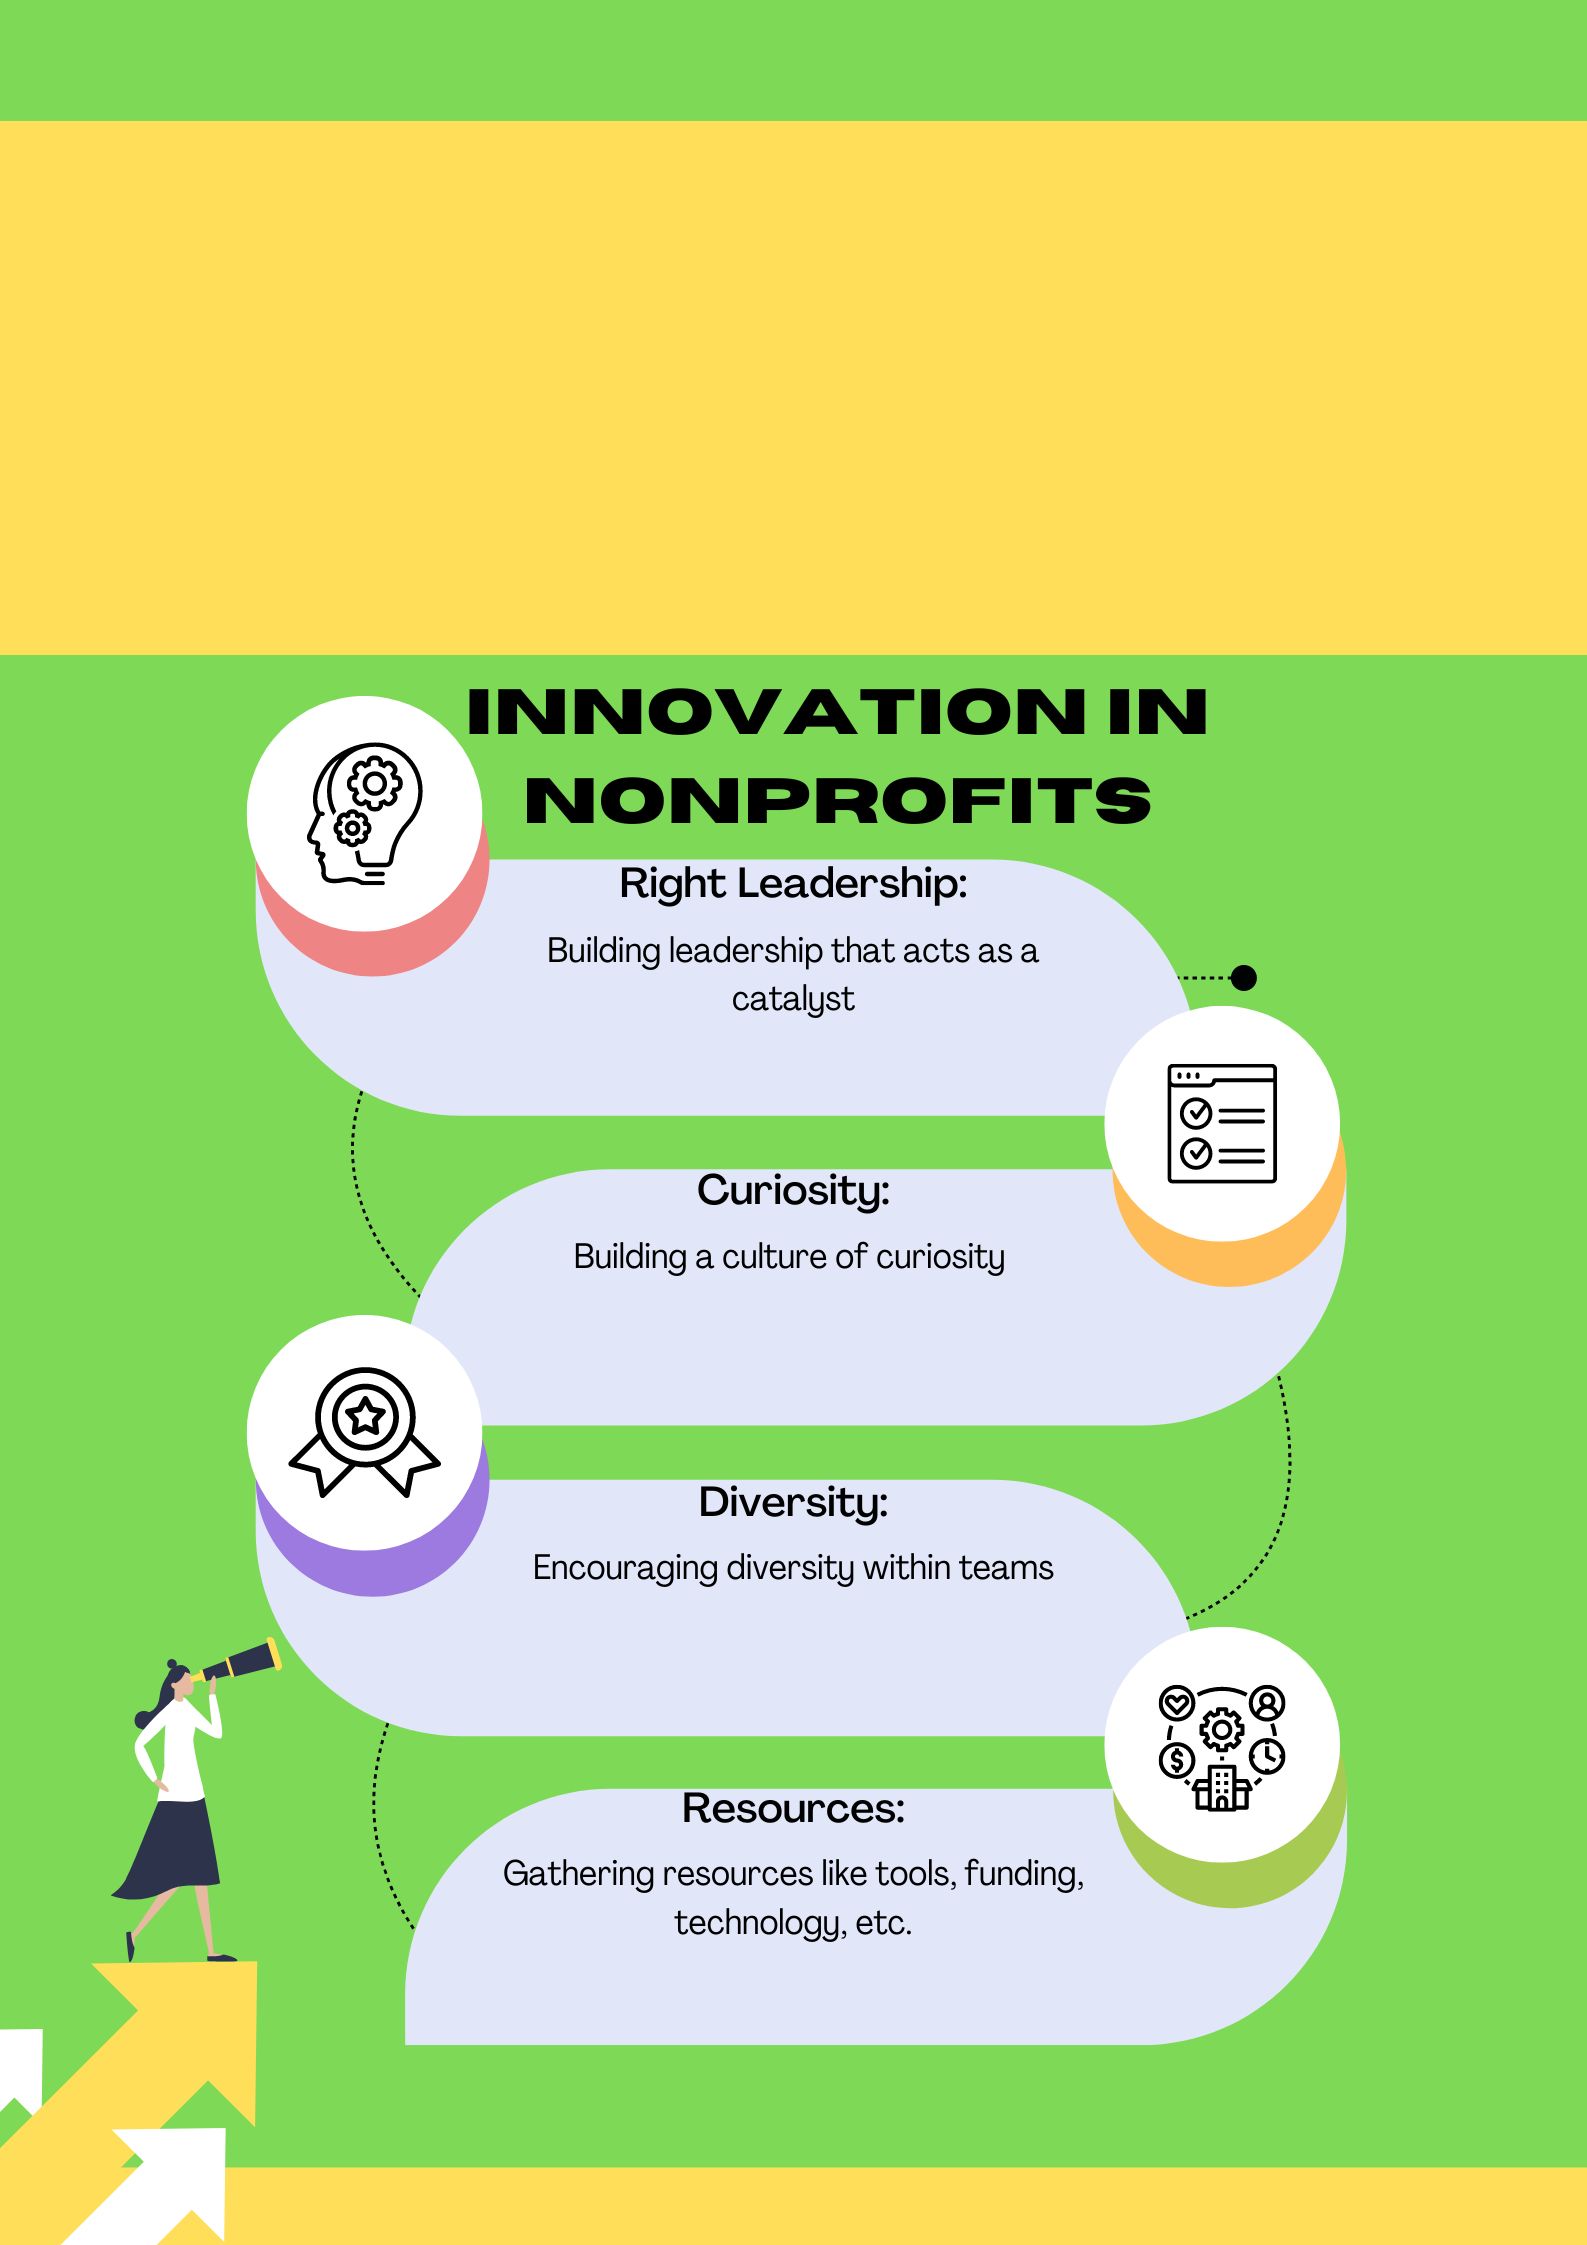 What can Nonprofits Learn from the Power of Innovation?